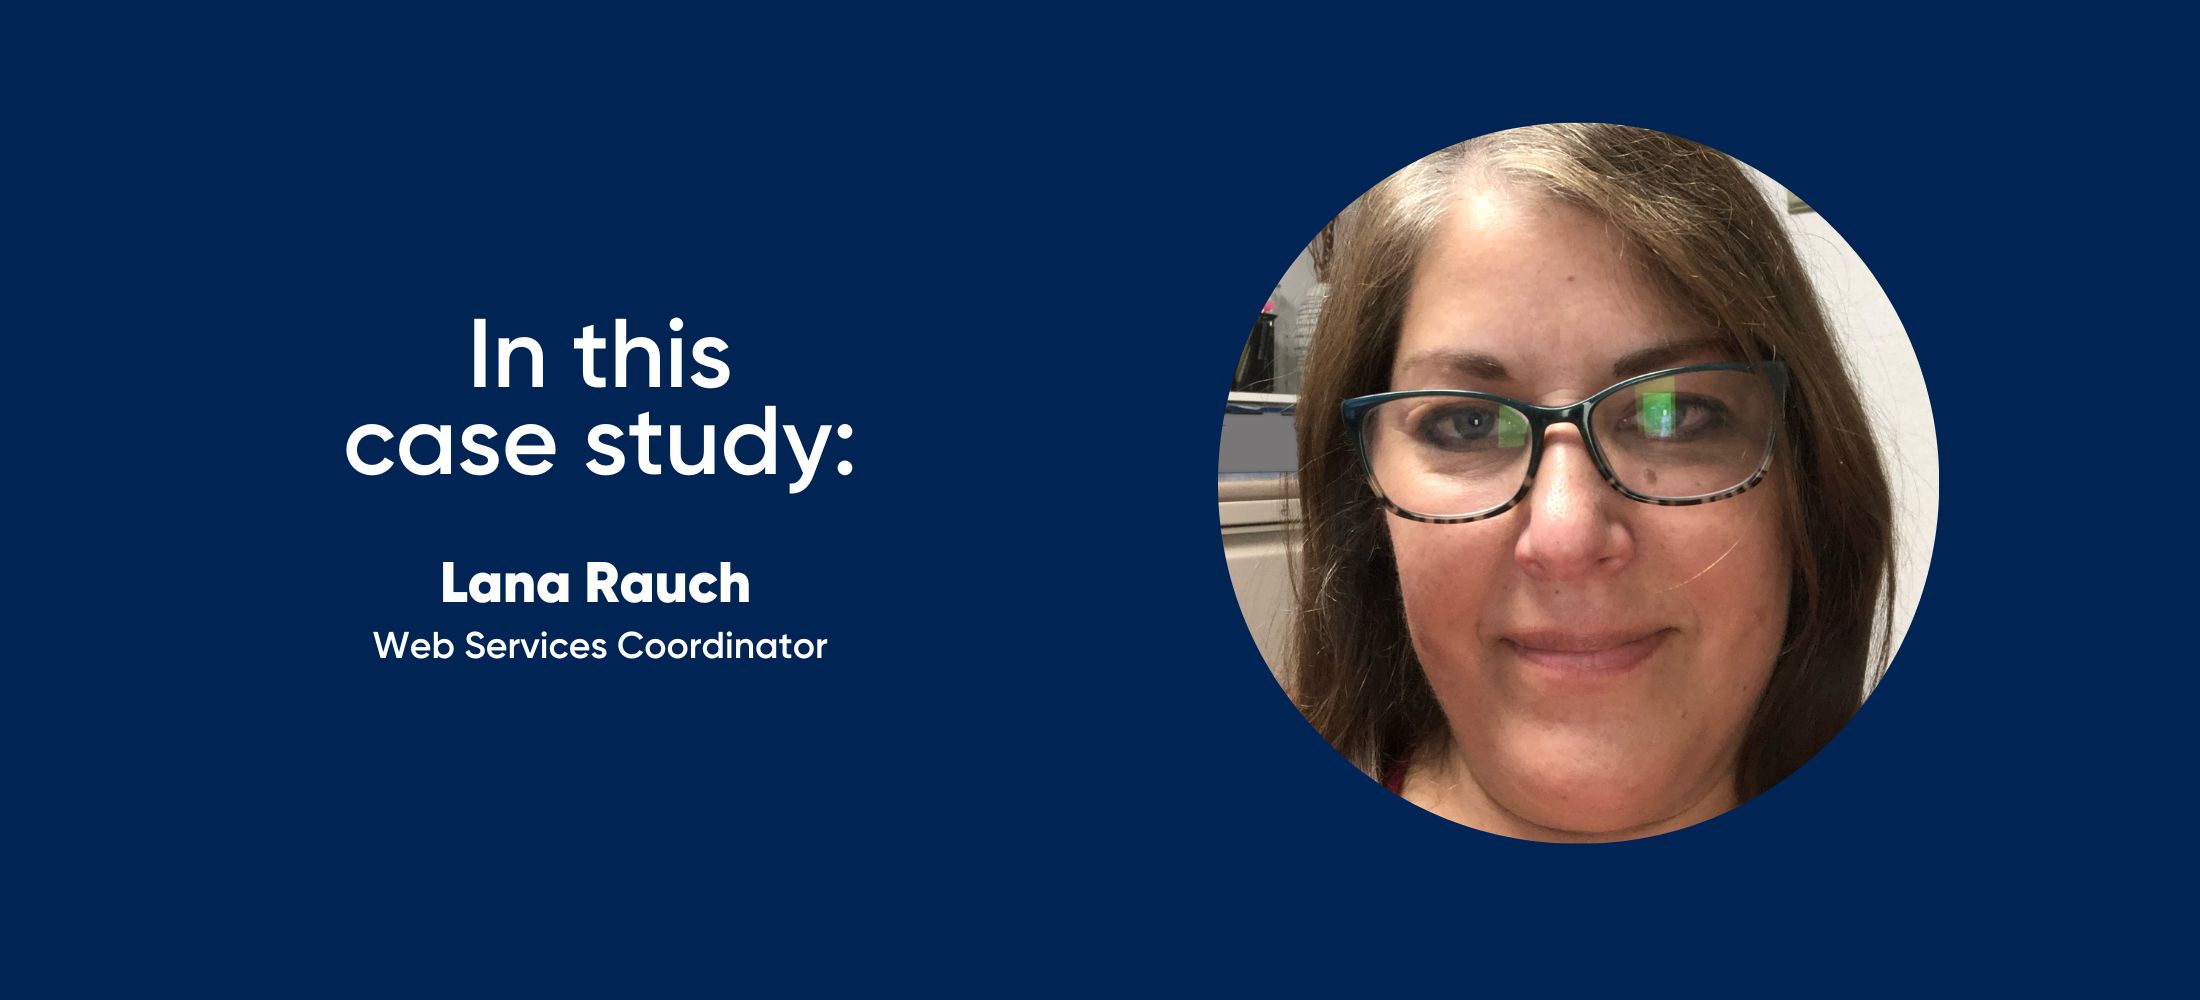 in this case study: Lana Rauch - Web Services Coordinator